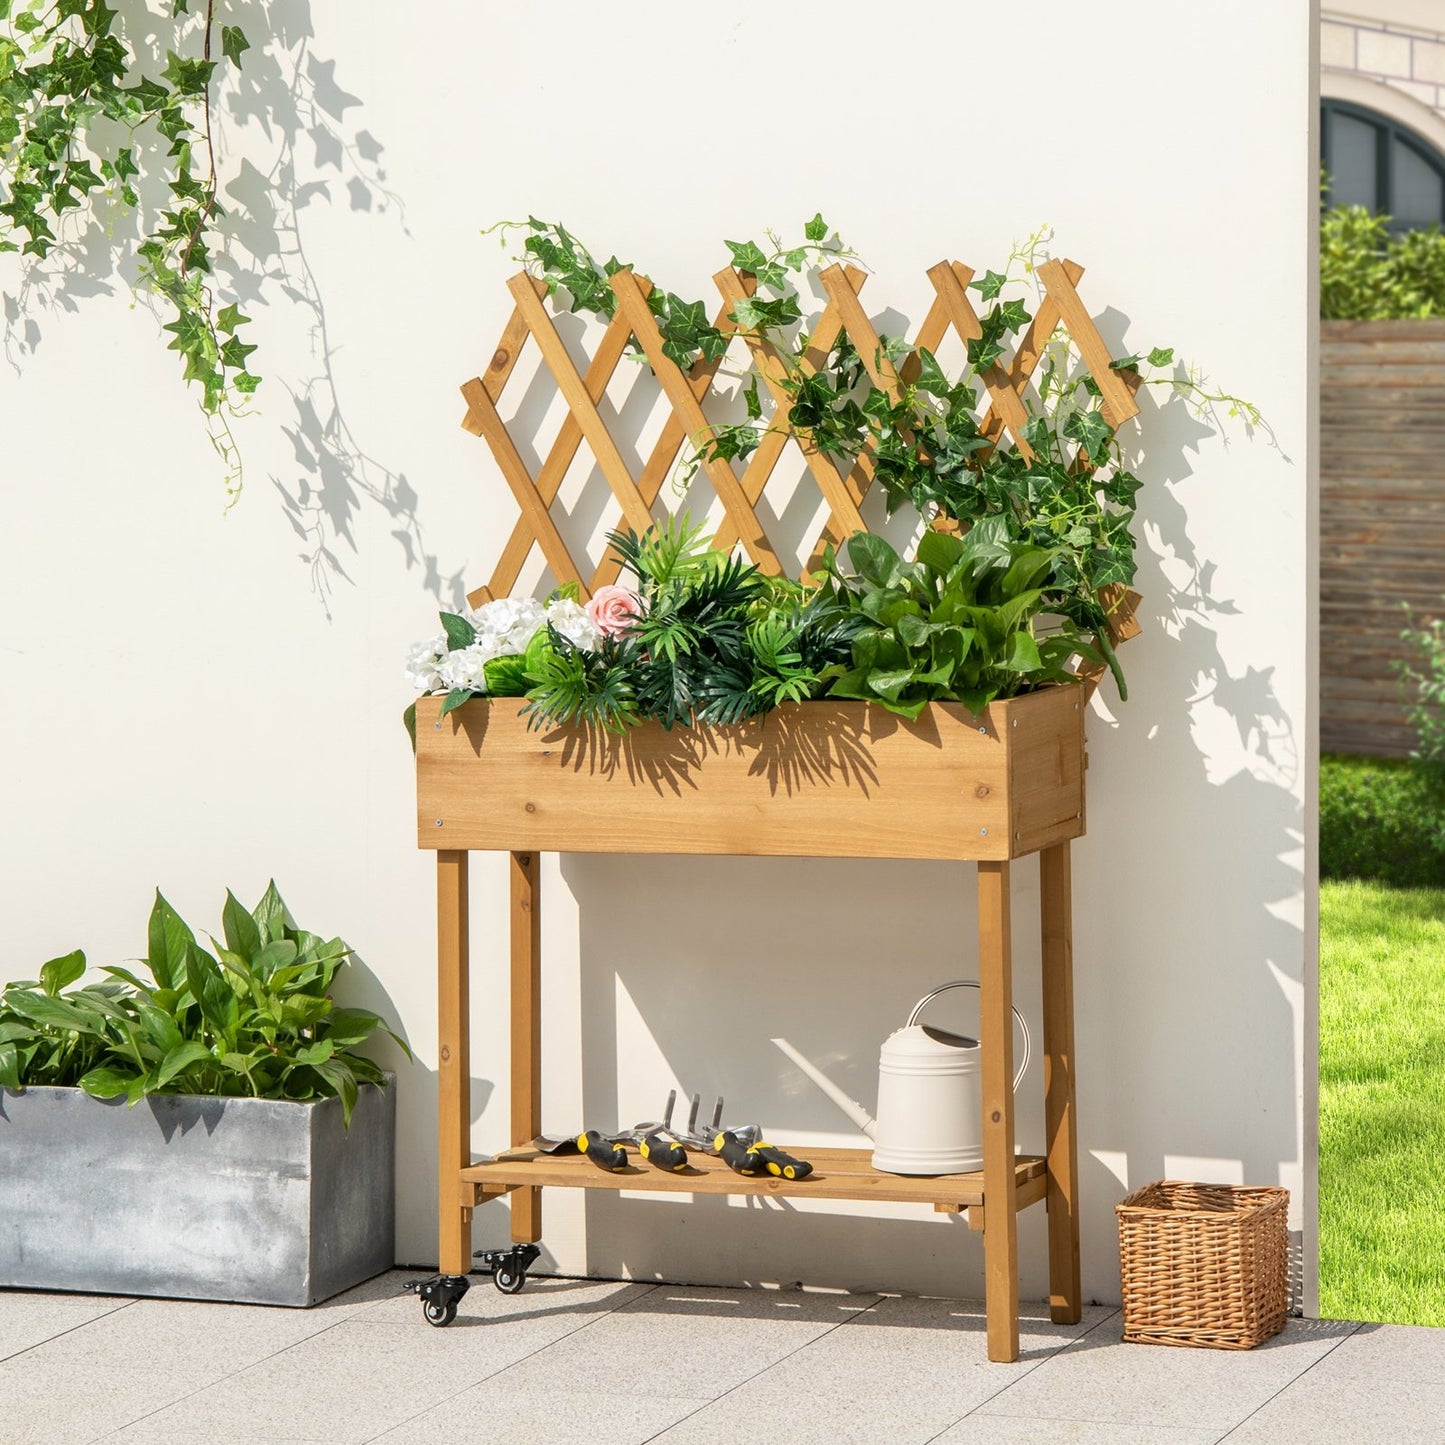 Wooden Raised Garden Bed Mobile Elevated Planter Box with Trellis, Natural